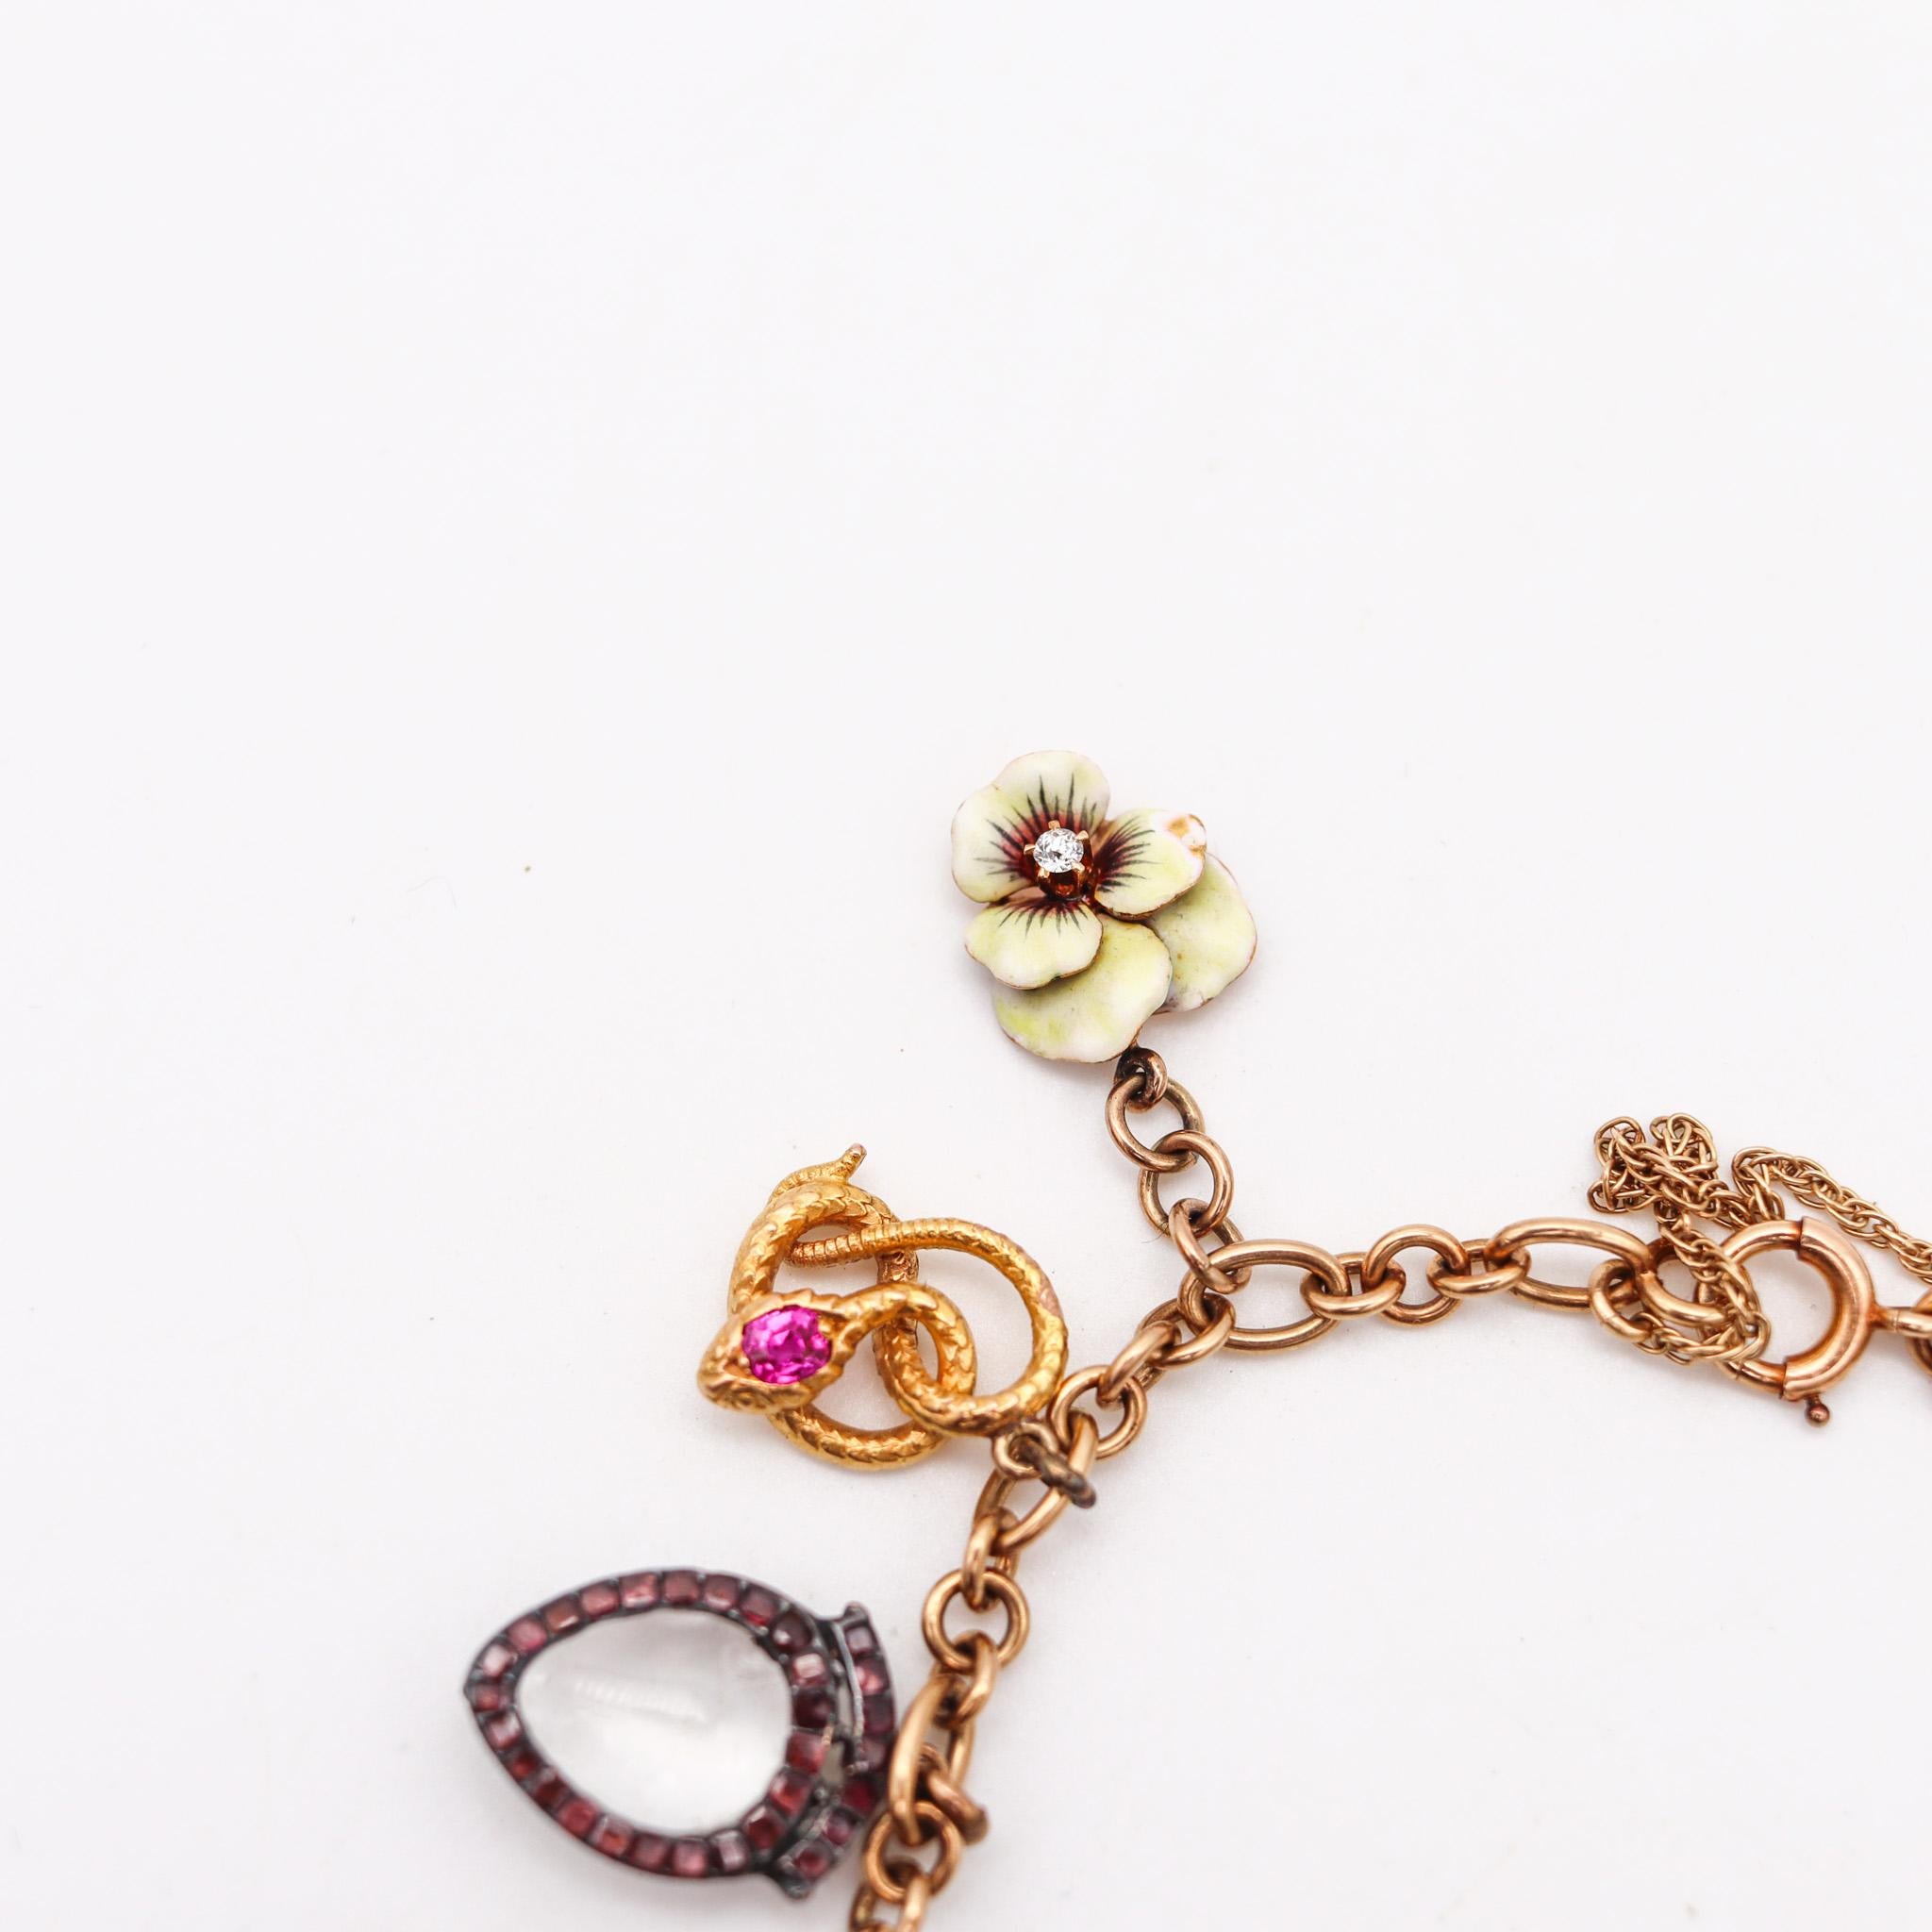 Art Nouveau 1910 Charms Bracelet In 14Kt Gold With Multi Gemstones And Enamels For Sale 1